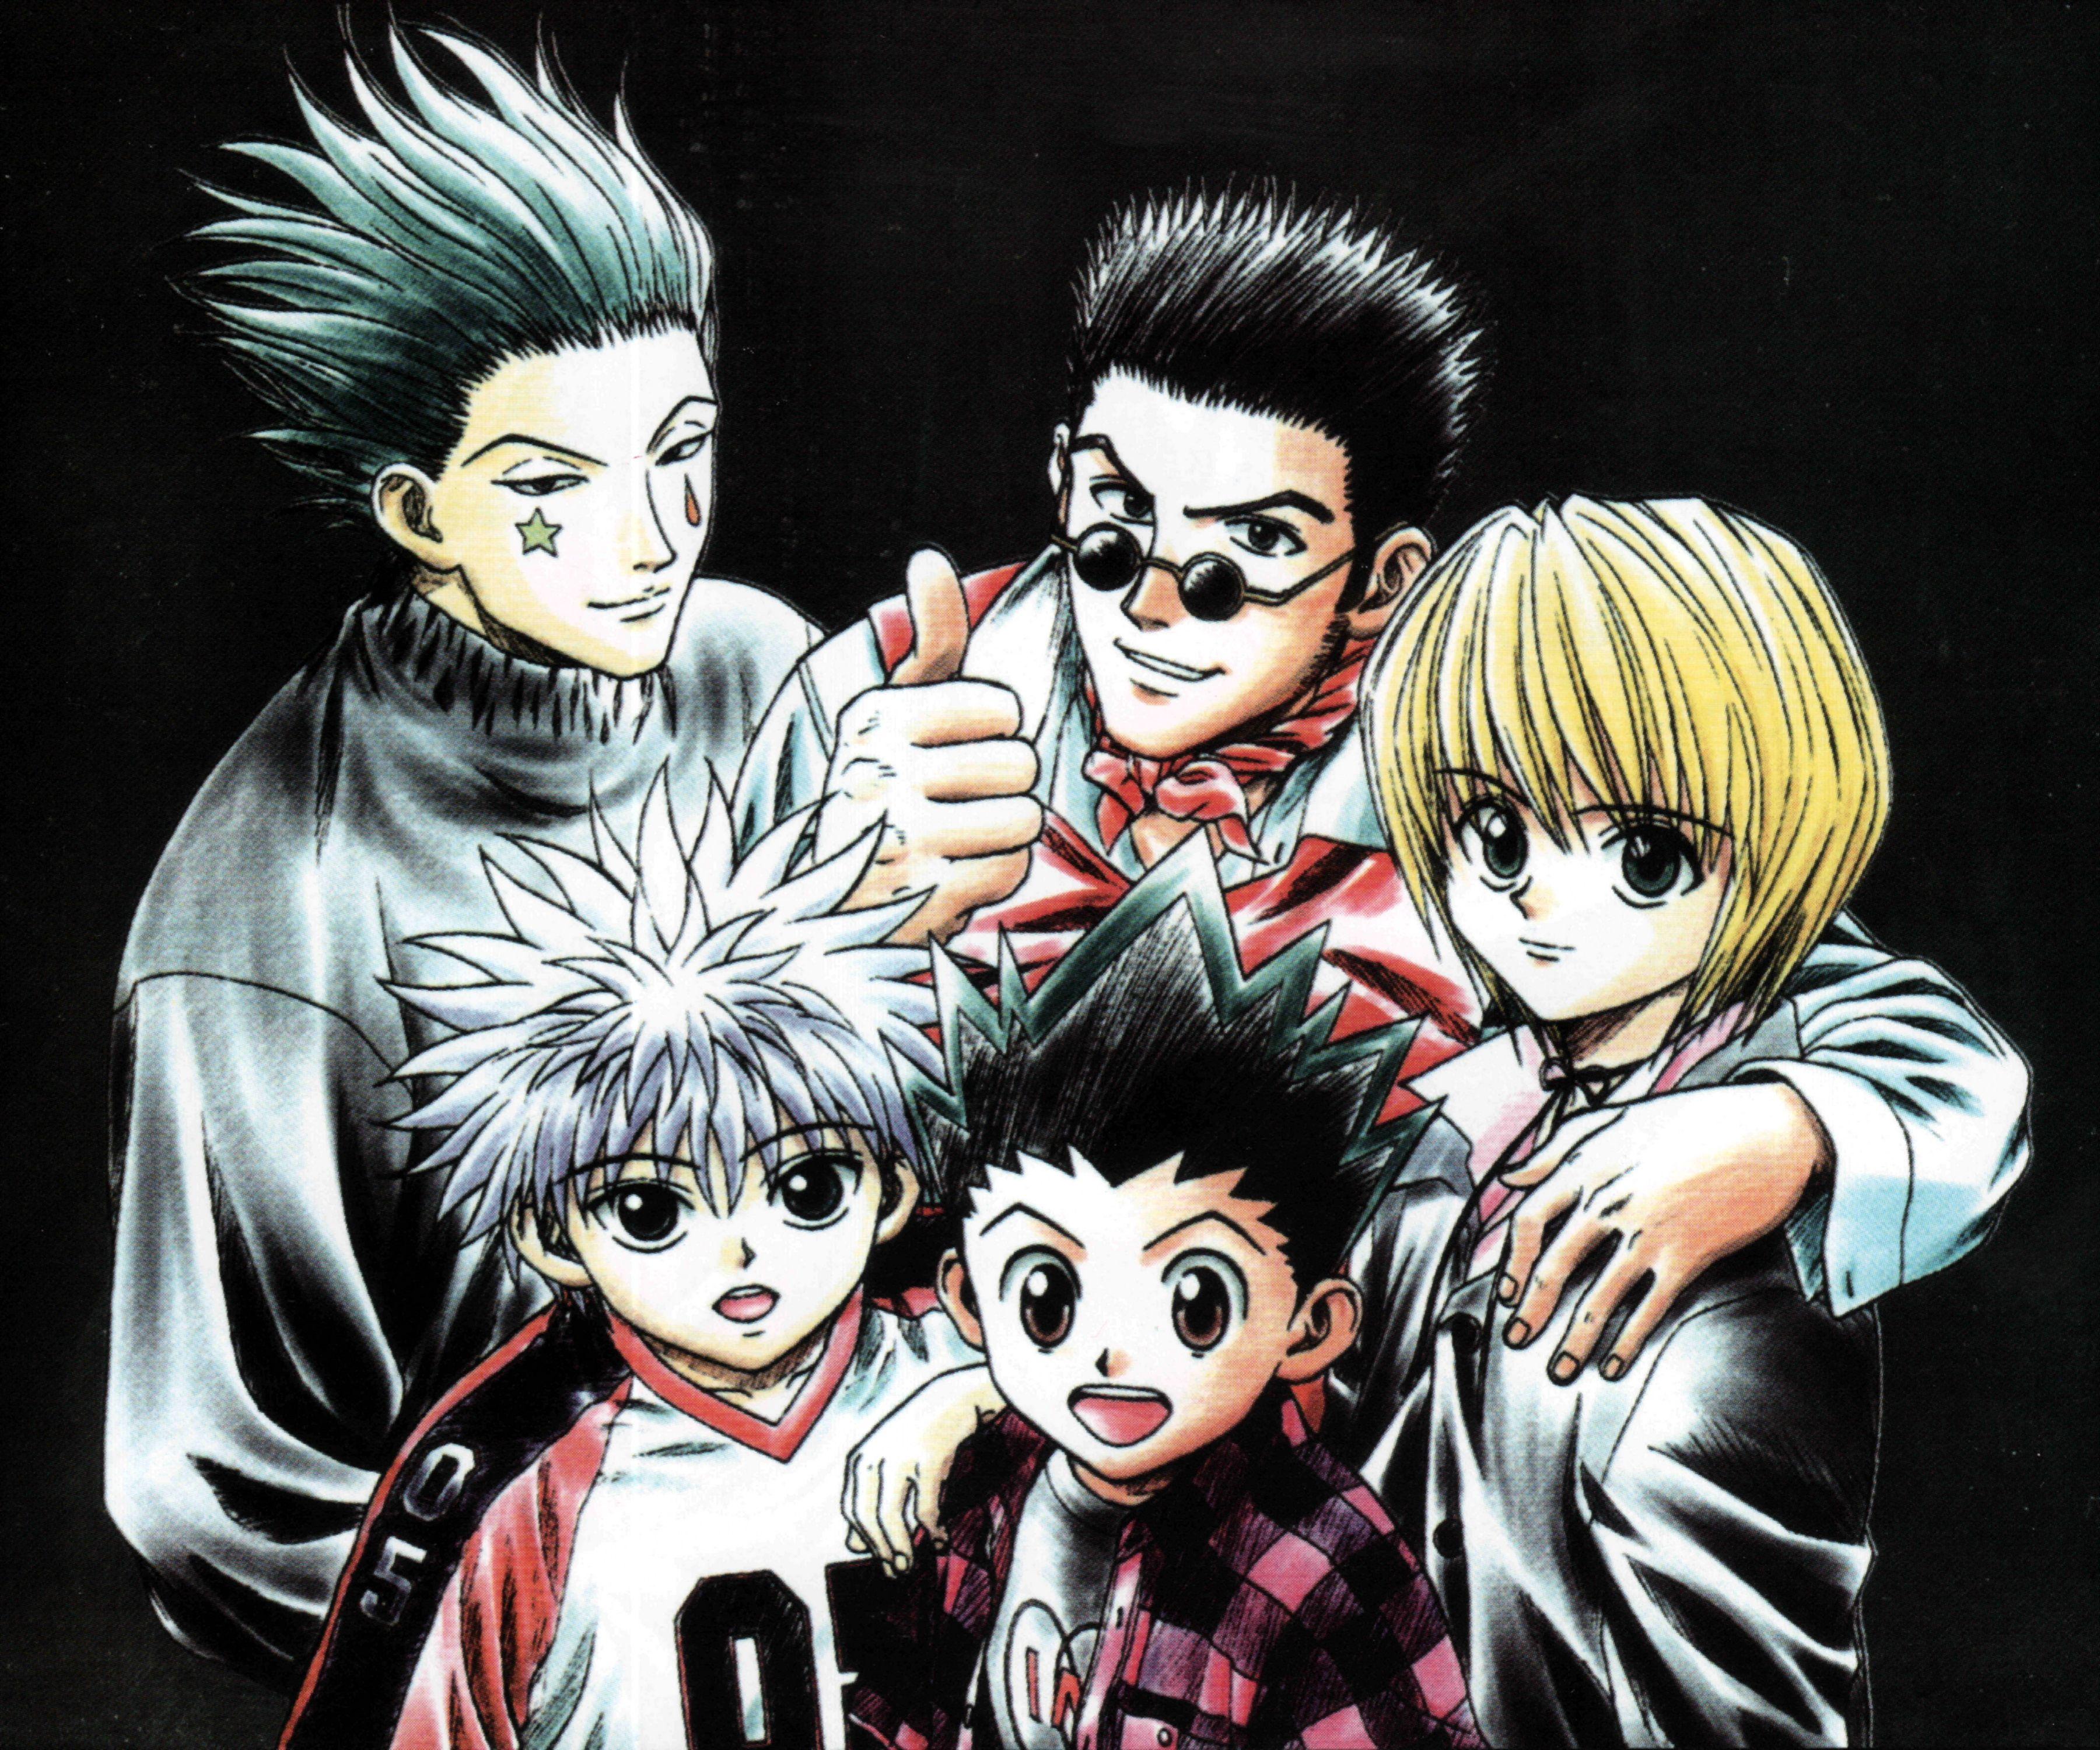 3600 x 3000 · jpeg - HxH Anime Ps4 Wallpapers - Wallpaper Cave